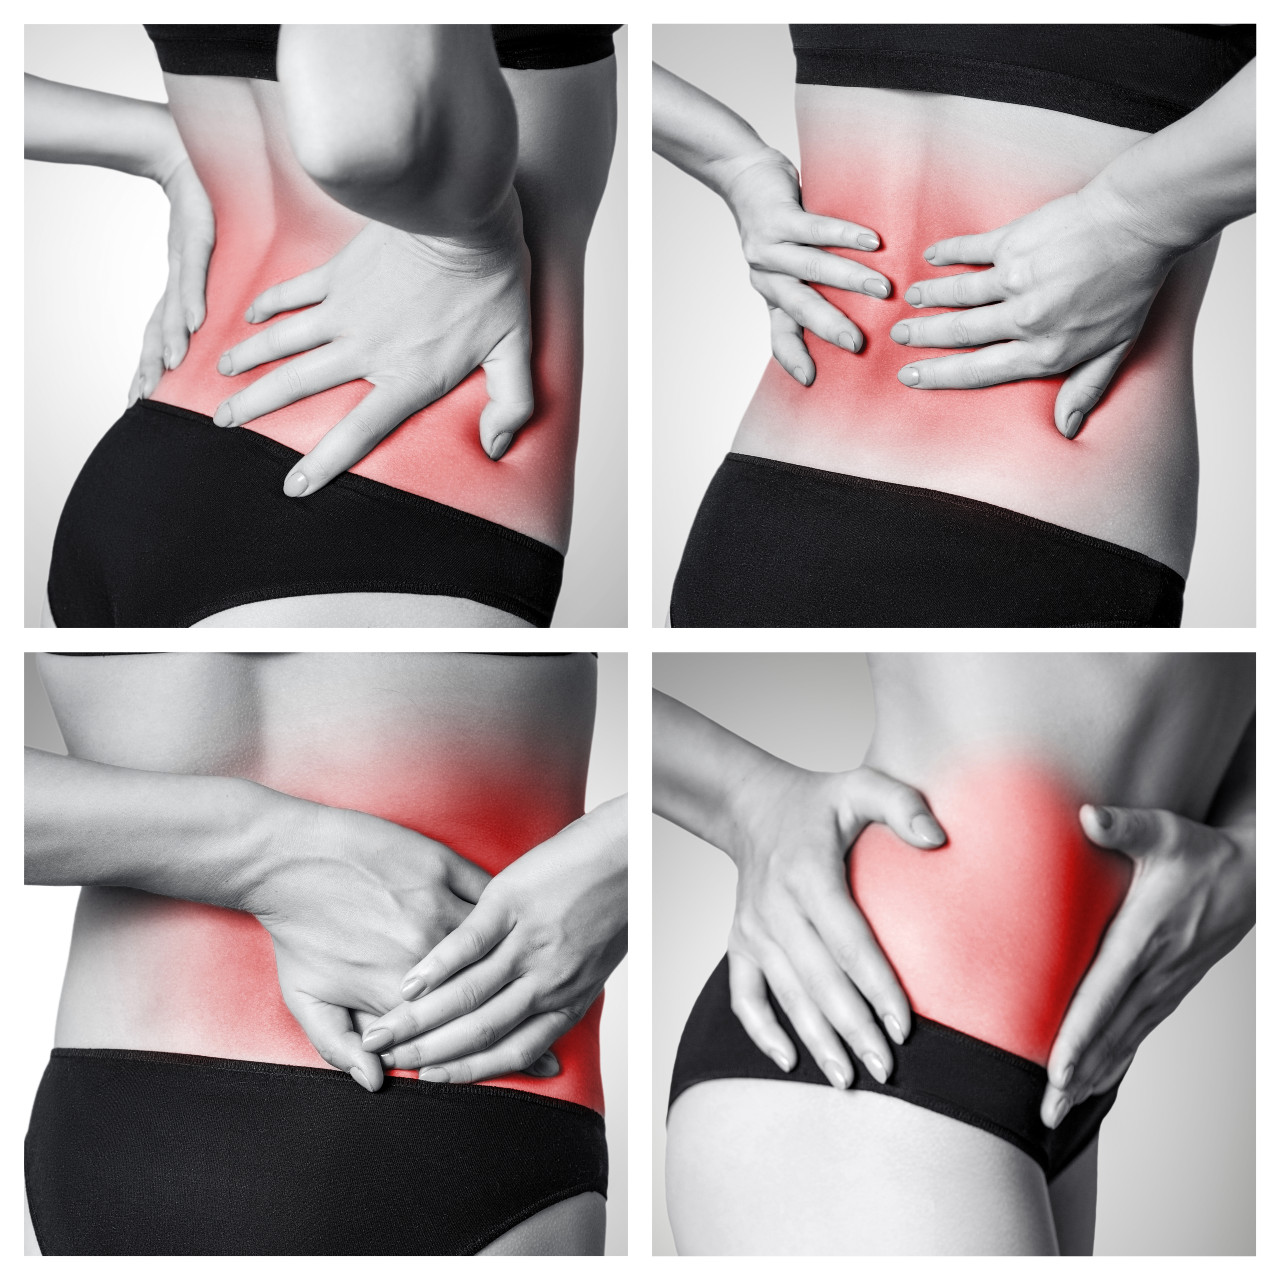 AMDA Clinic-Best Chiropractic treatment for spine injury or back pain